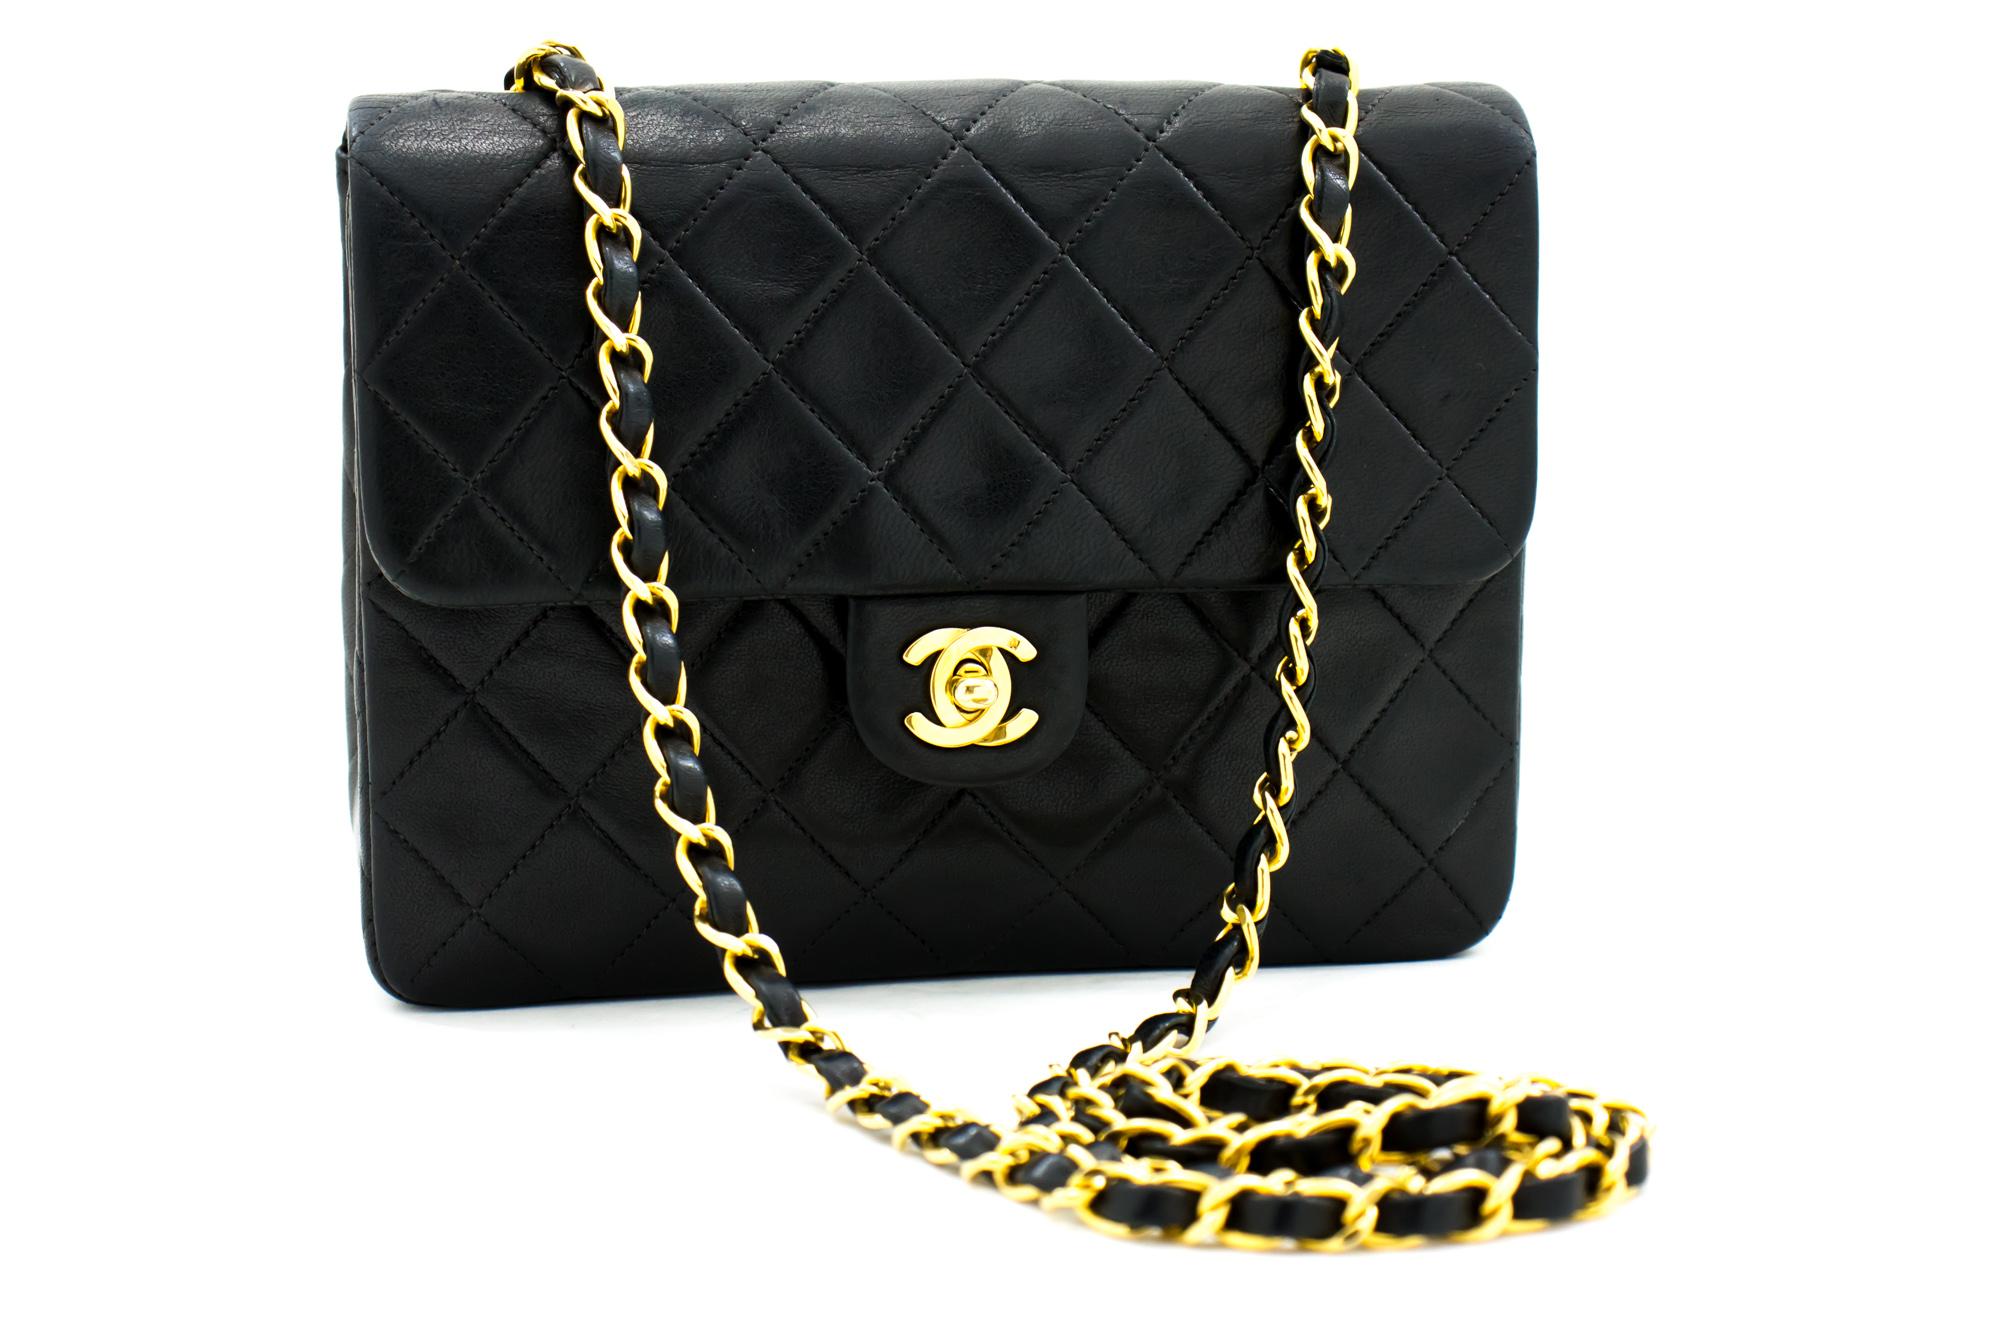 An authentic CHANEL Mini Square Small Chain Shoulder Bag Crossbody Black Quilt. The color is Black. The outside material is Leather. The pattern is Solid. This item is Vintage / Classic. The year of manufacture would be 1991-1994.
Conditions &